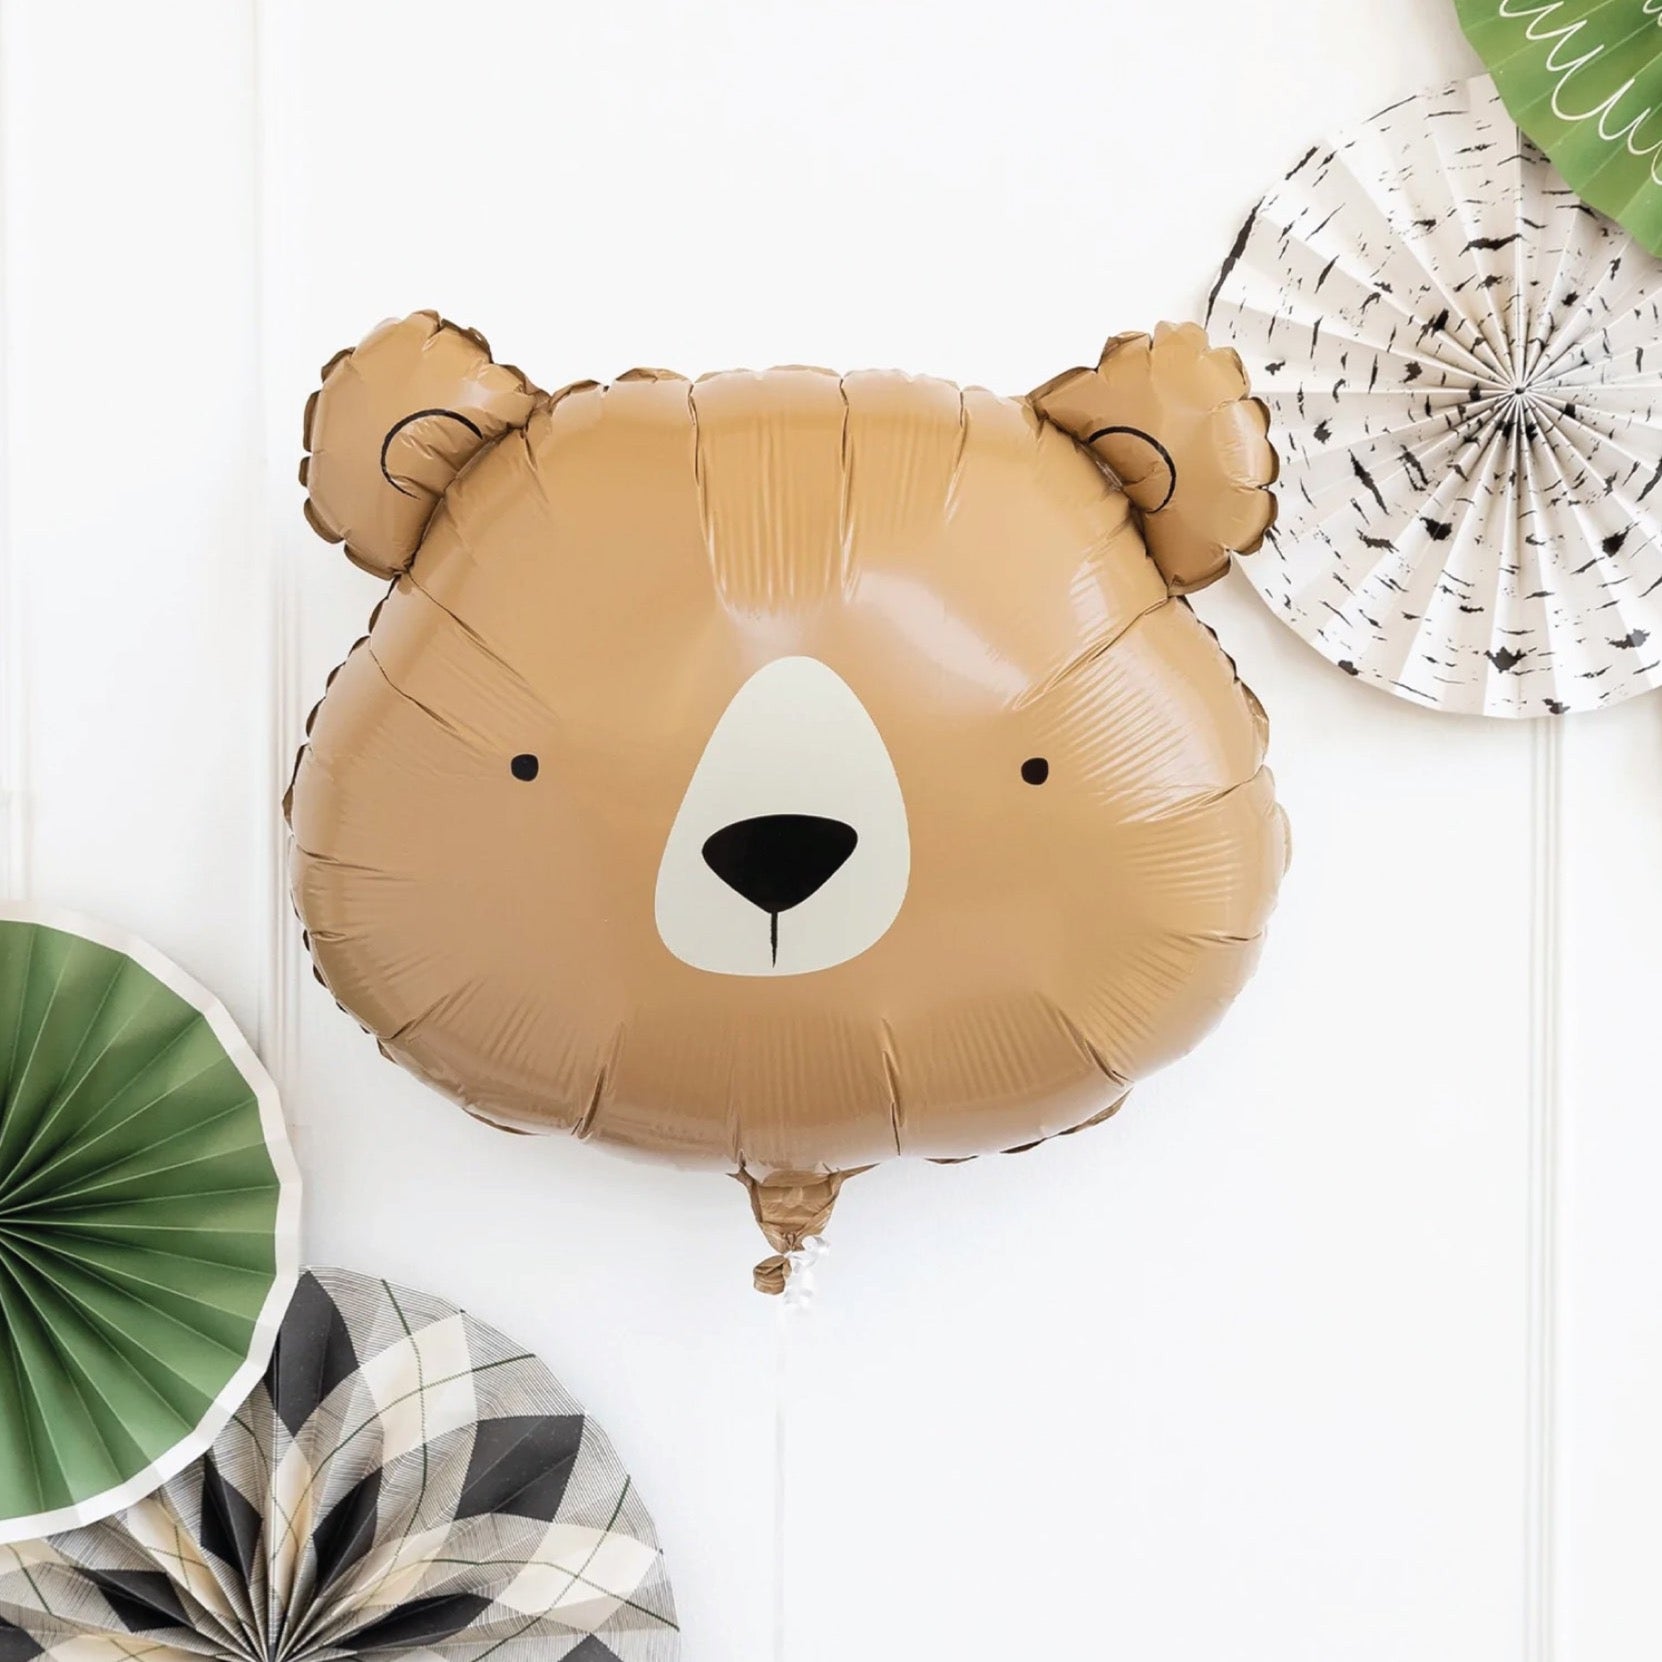 Adventure Bear Shaped Foil Balloon 24in | The Party Darling